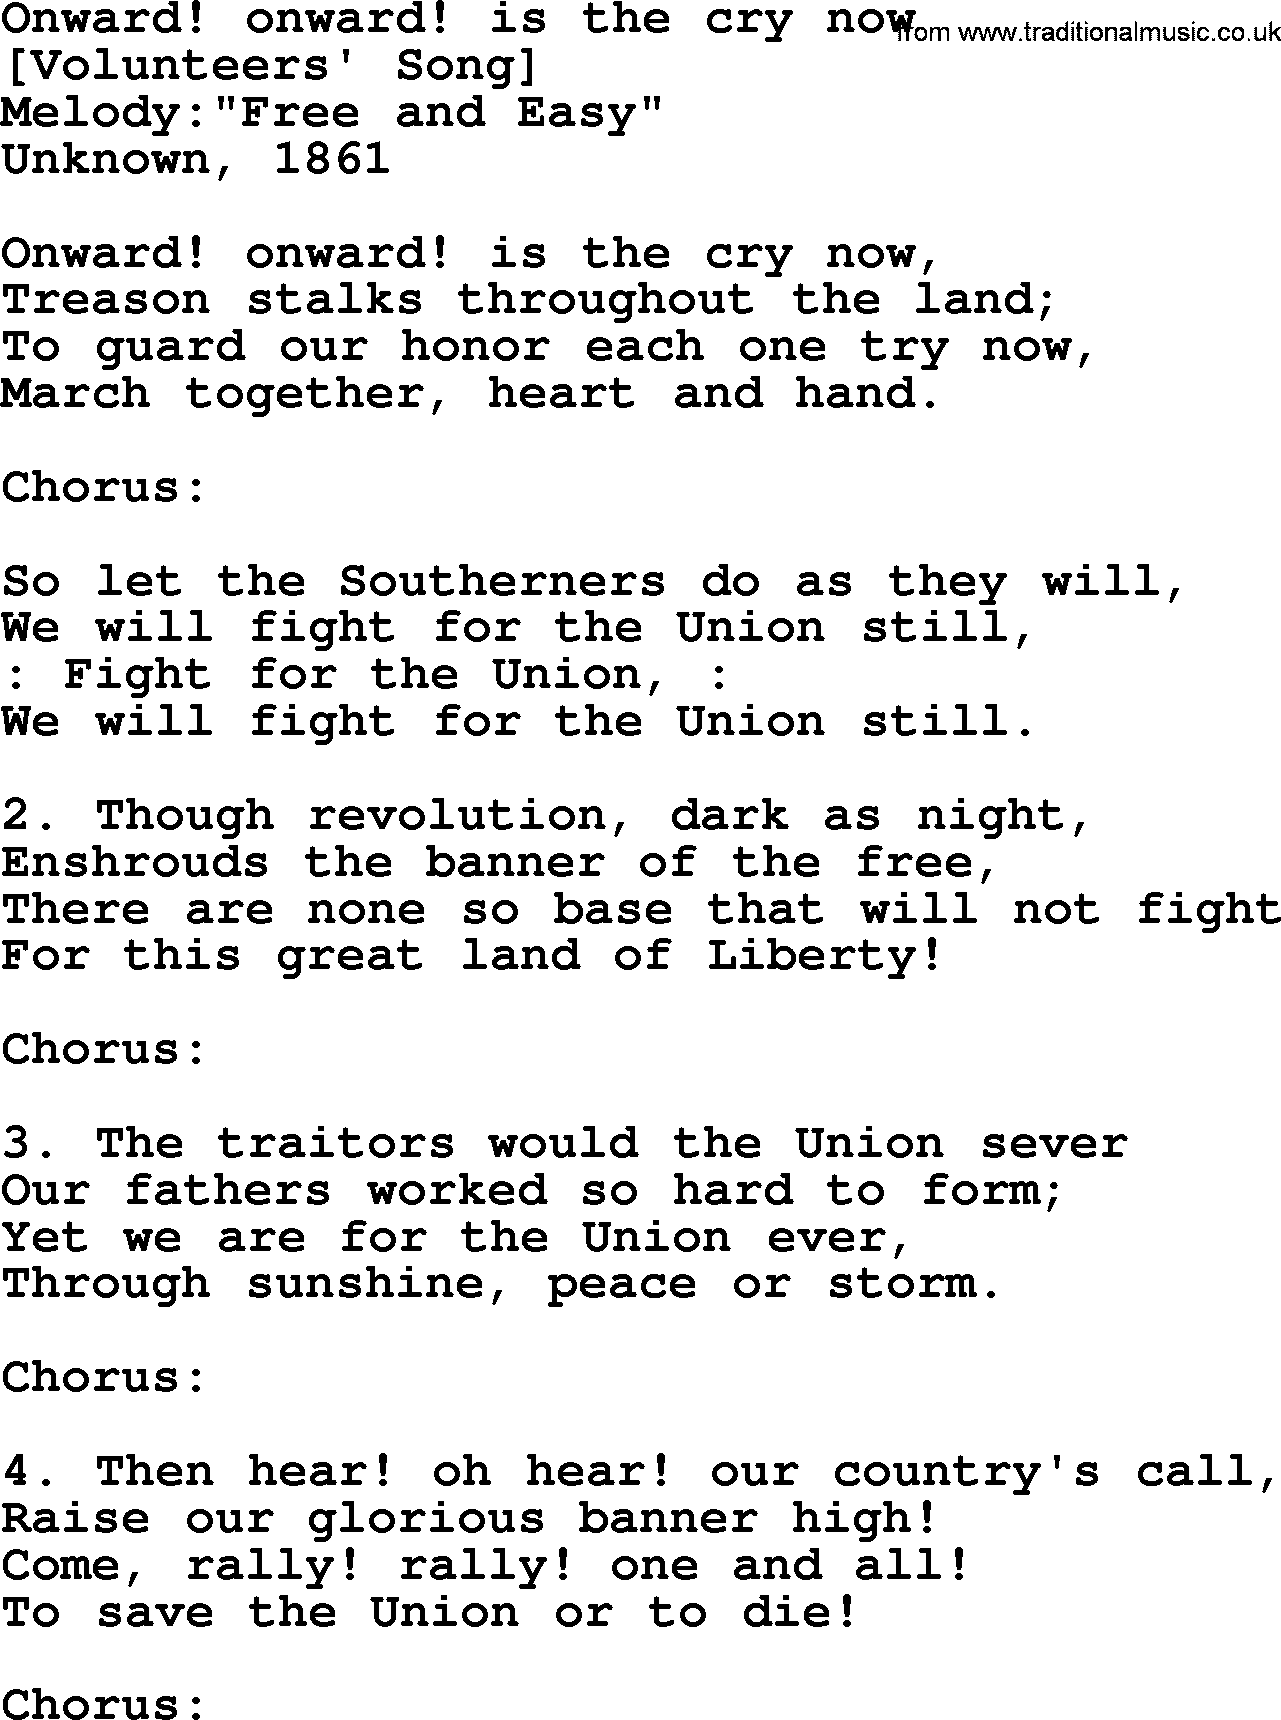 Old American Song: Onward! Onward! Is The Cry Now, lyrics